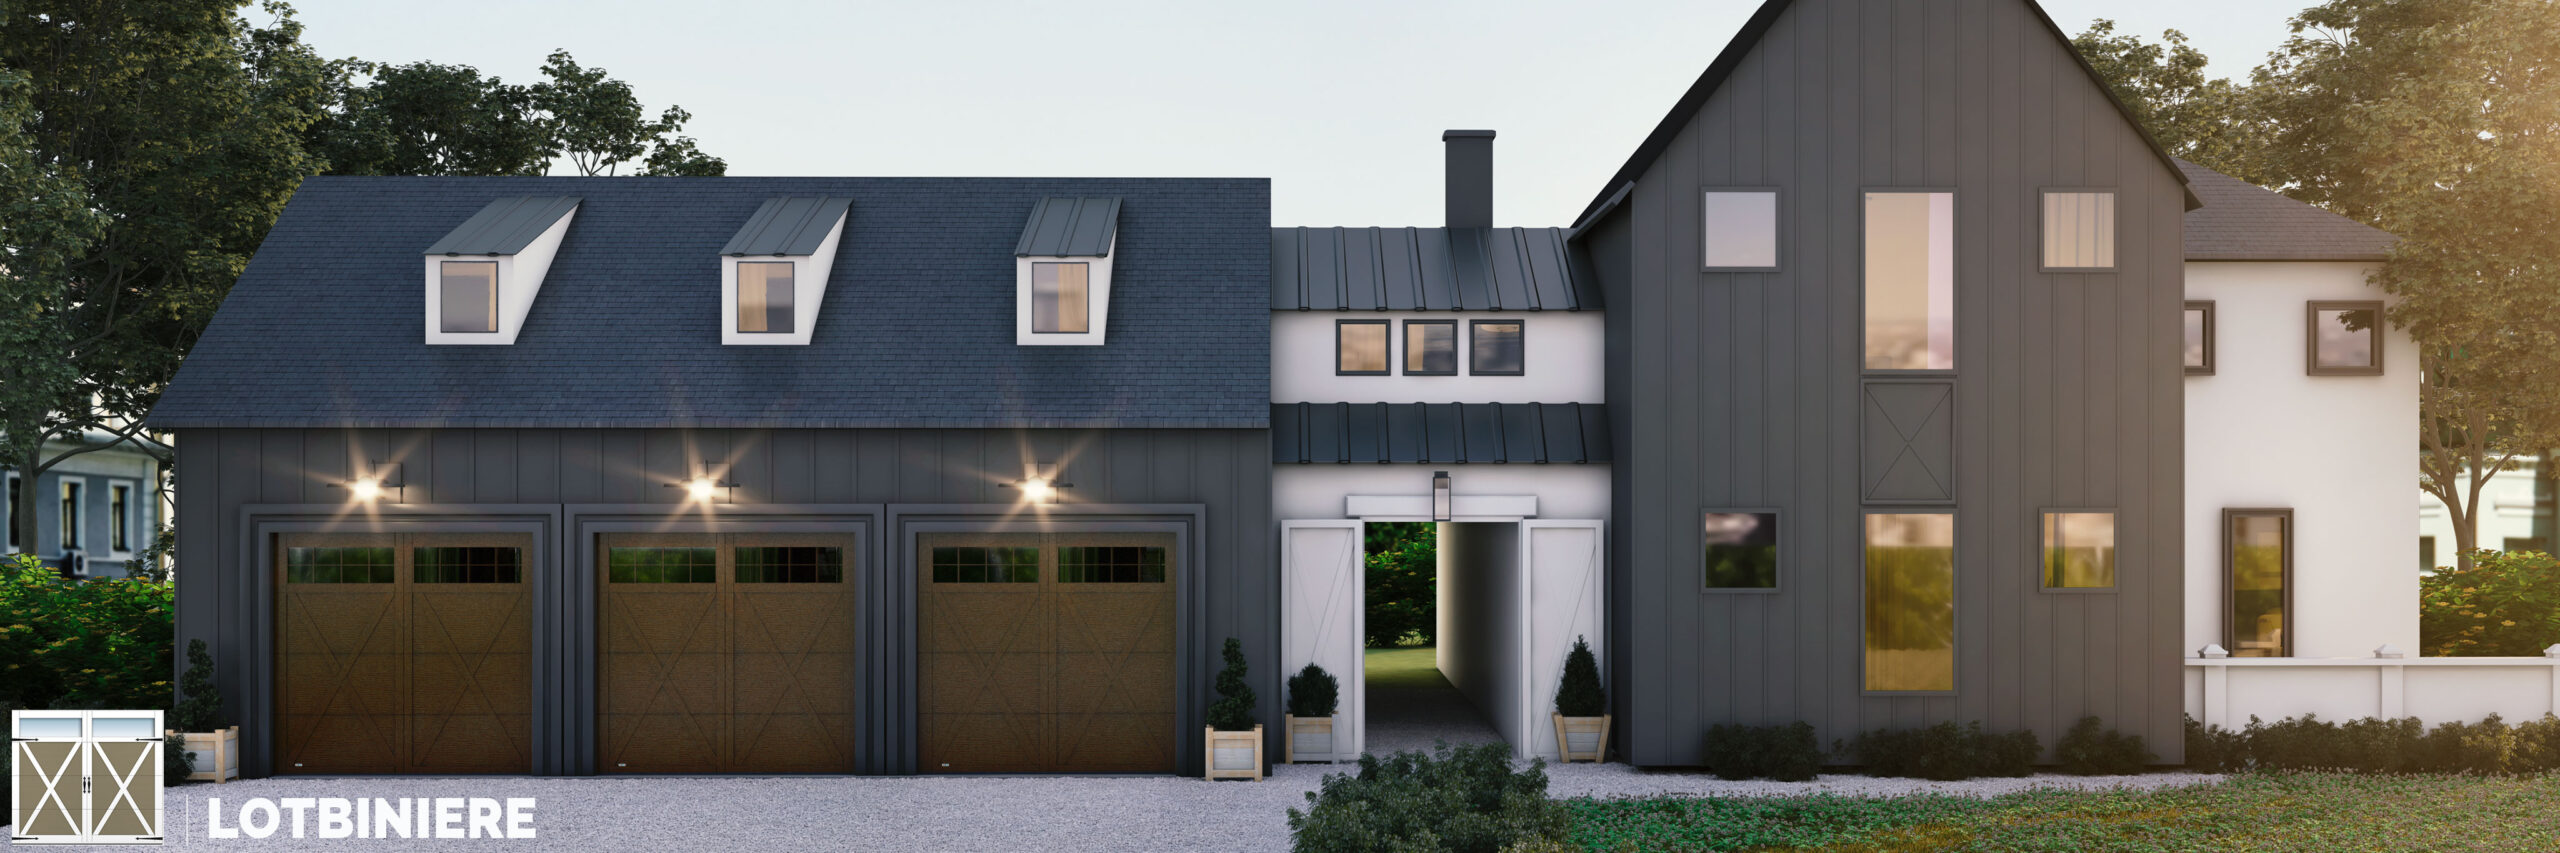 lotbiniere carriage house style garage door by garex scaled